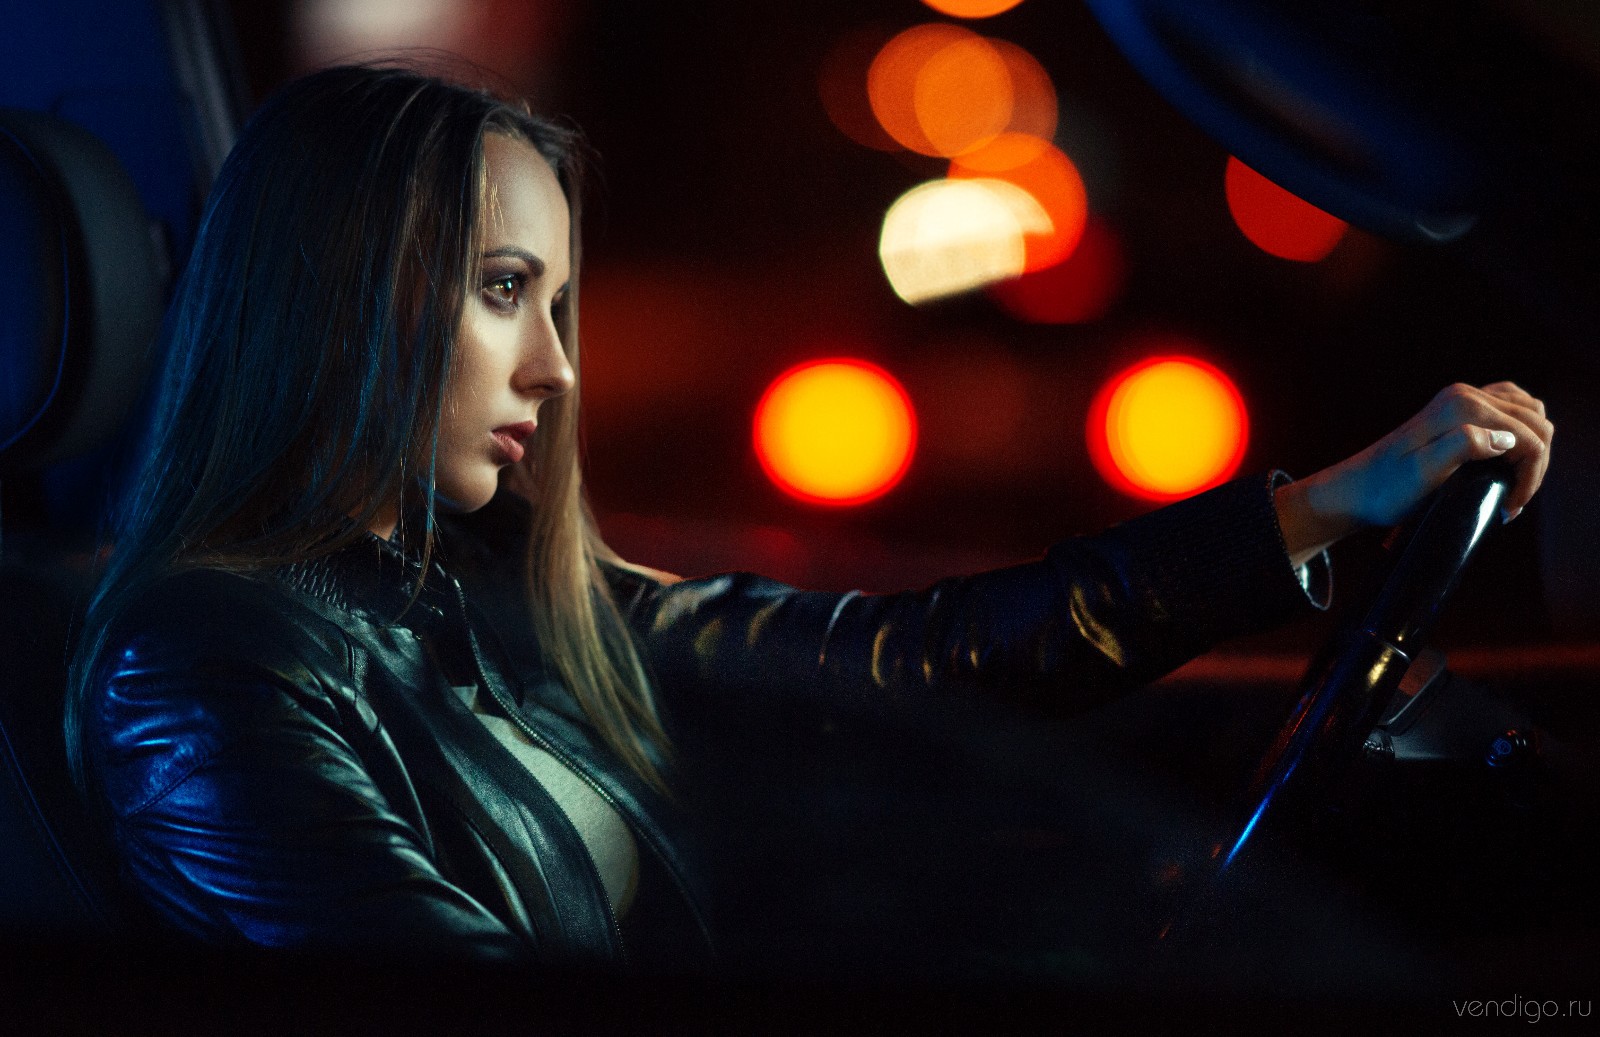 People 1600x1037 Evgeniy Bulatov women model brunette driving women with cars leather jacket looking into the distance profile night black jackets car interior Dasha (model)